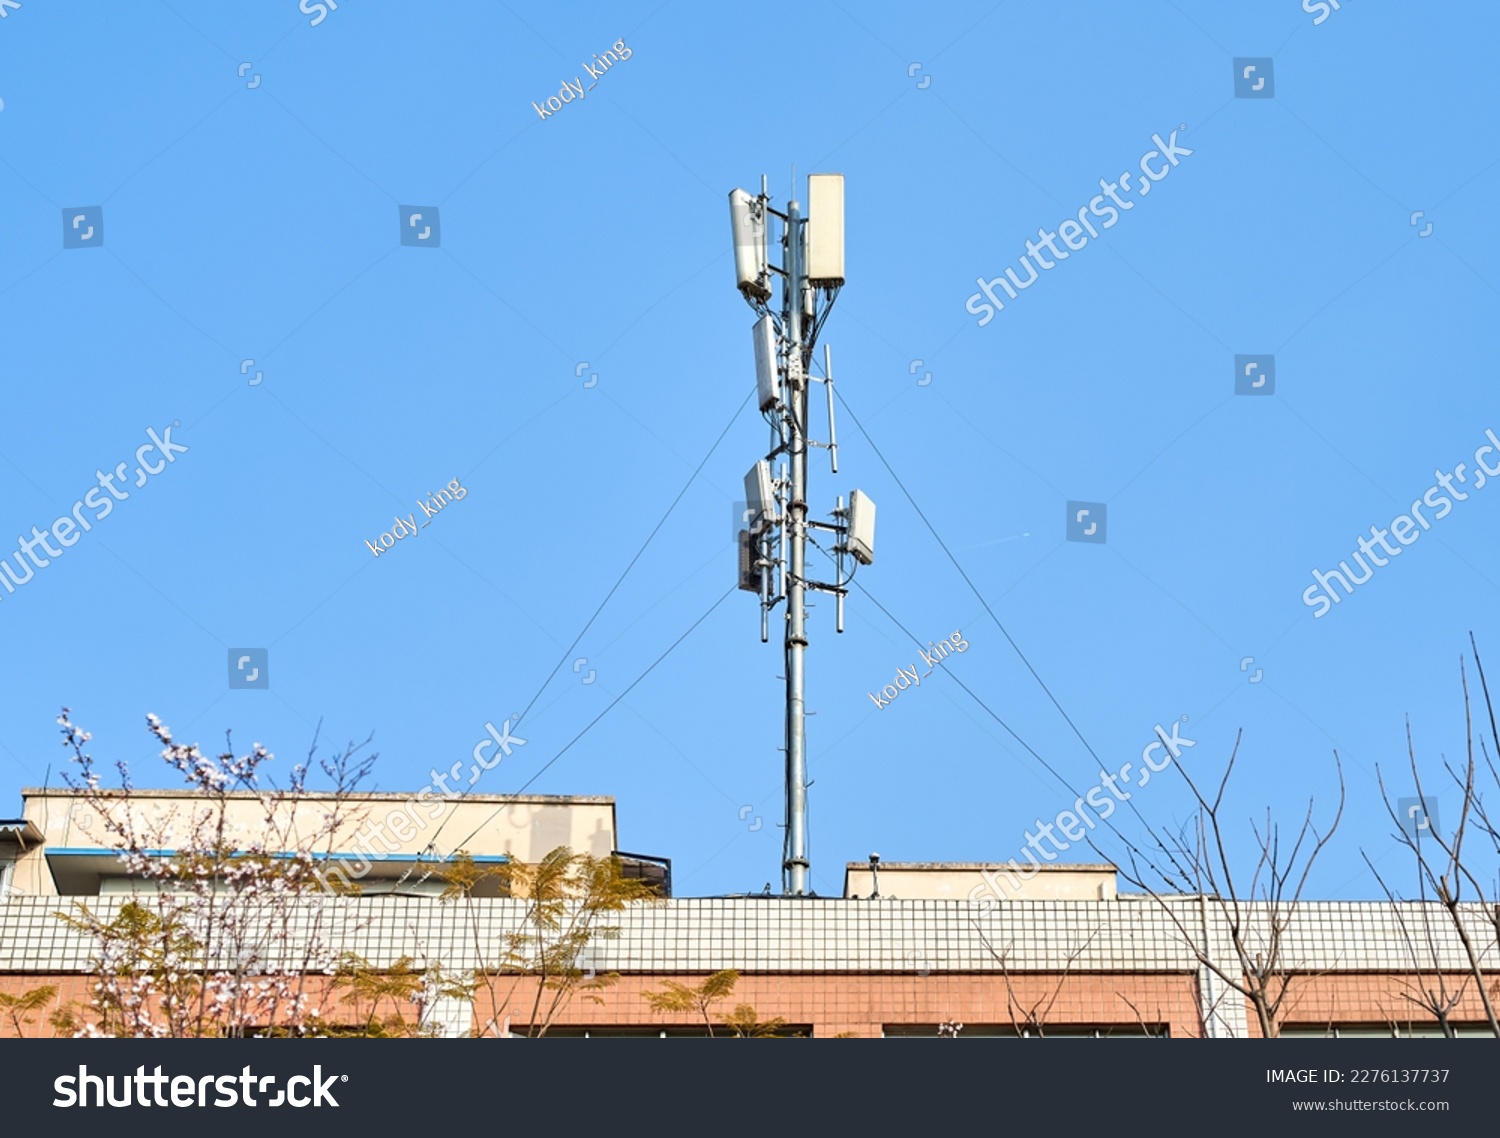 Telecom signal transmitting base station on the roof of a residential building in Chengdu, China #2276137737